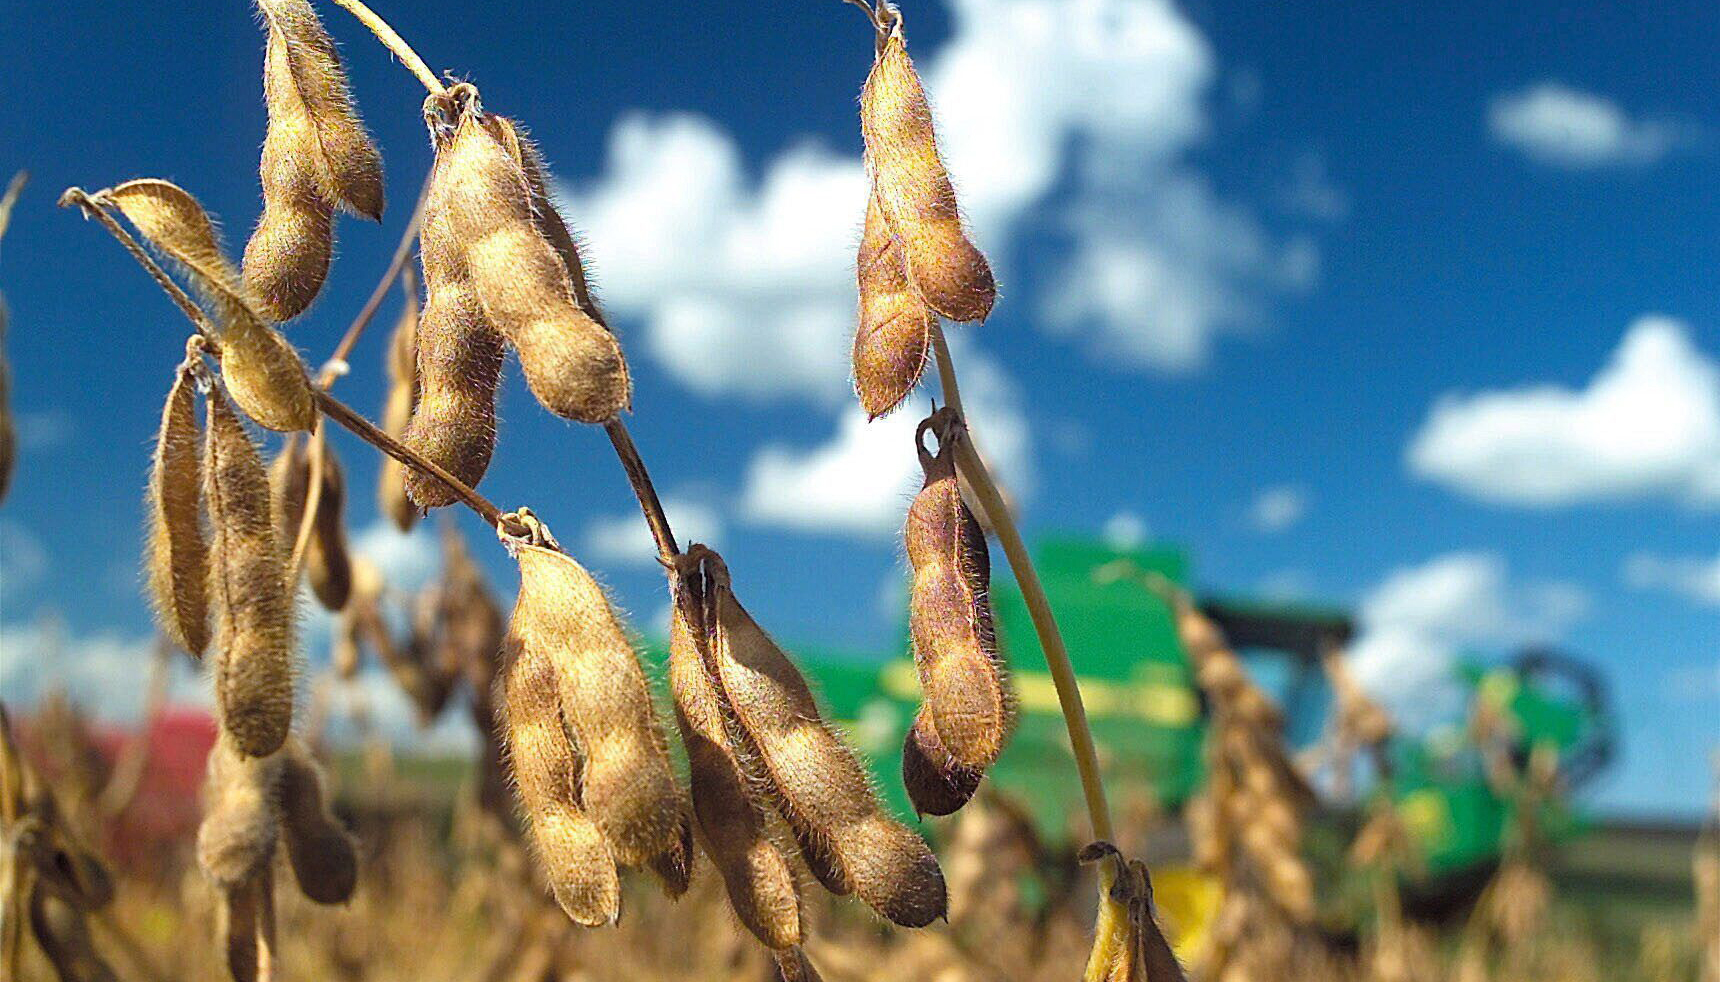 Agraral lowered Brazil’s soybean production forecast for 2021 / 22